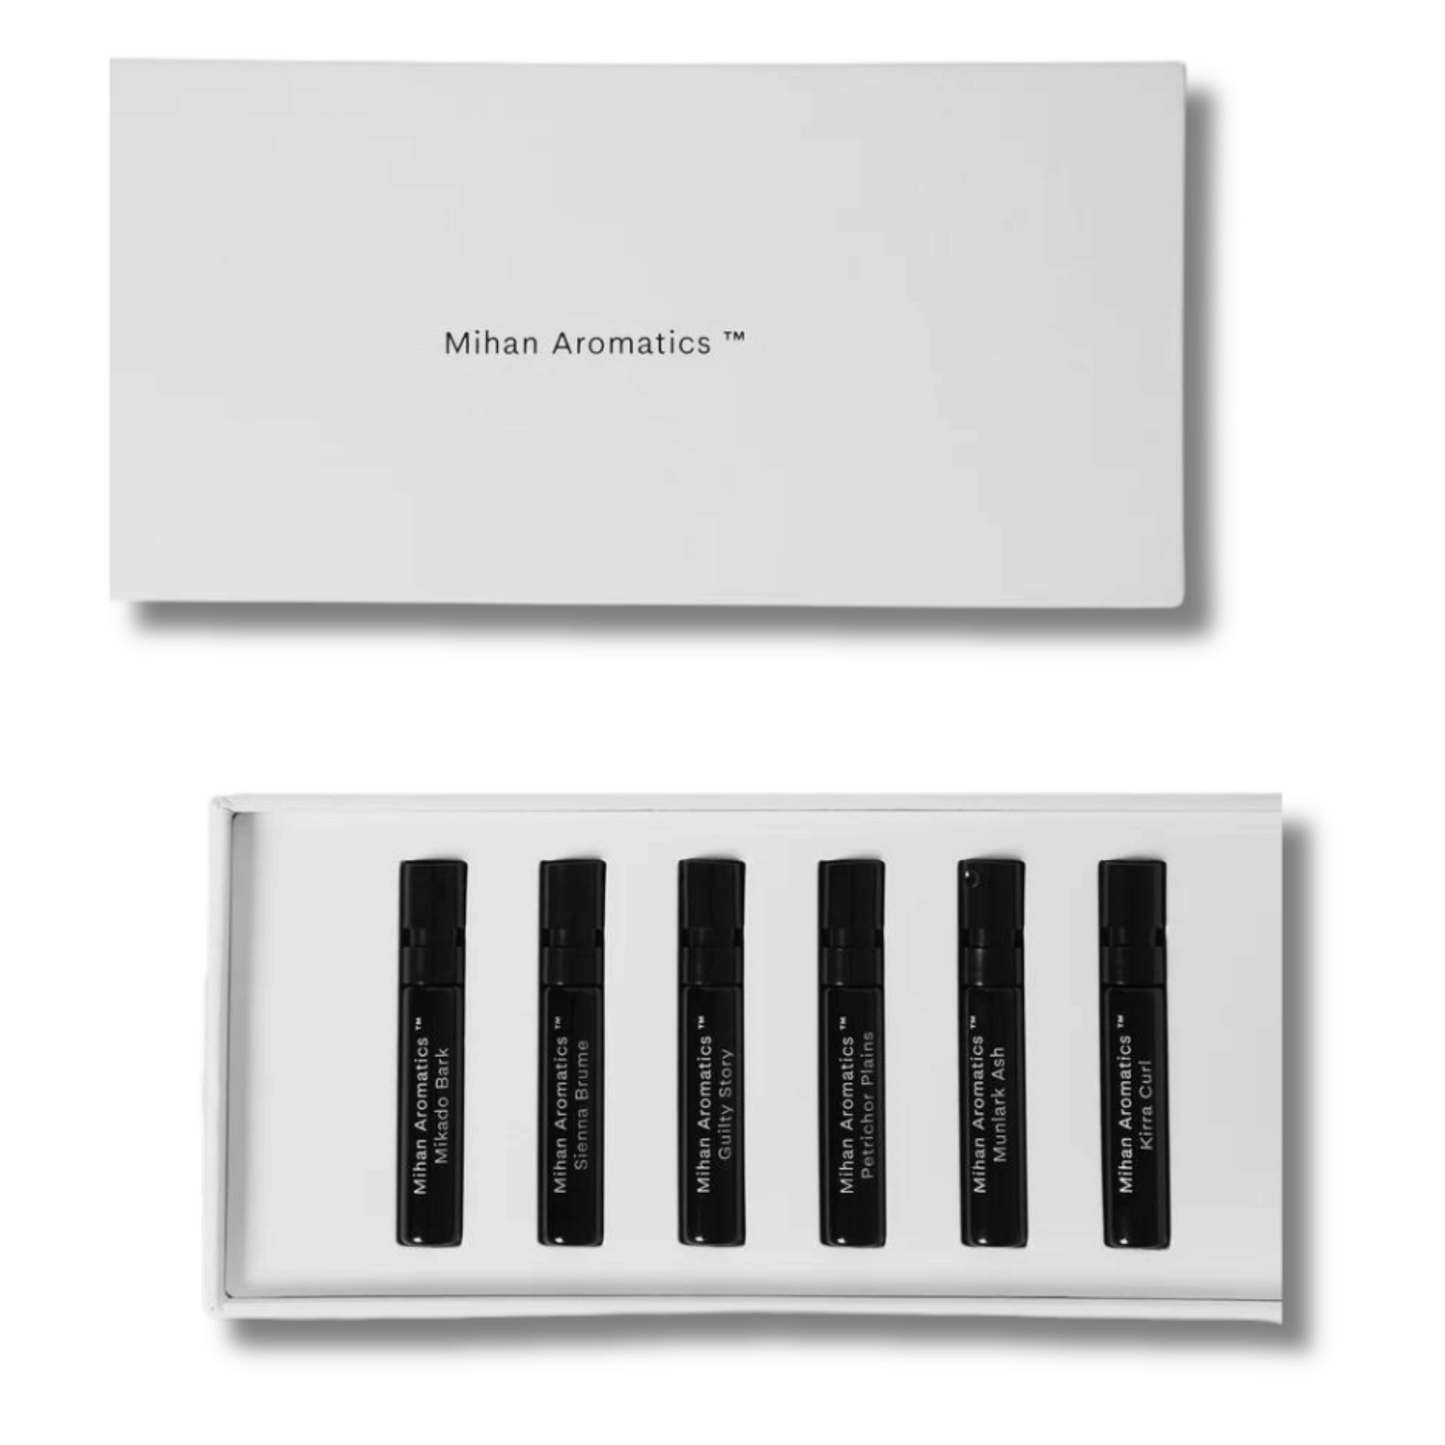 Primary Image of Fragrance Discovery Set